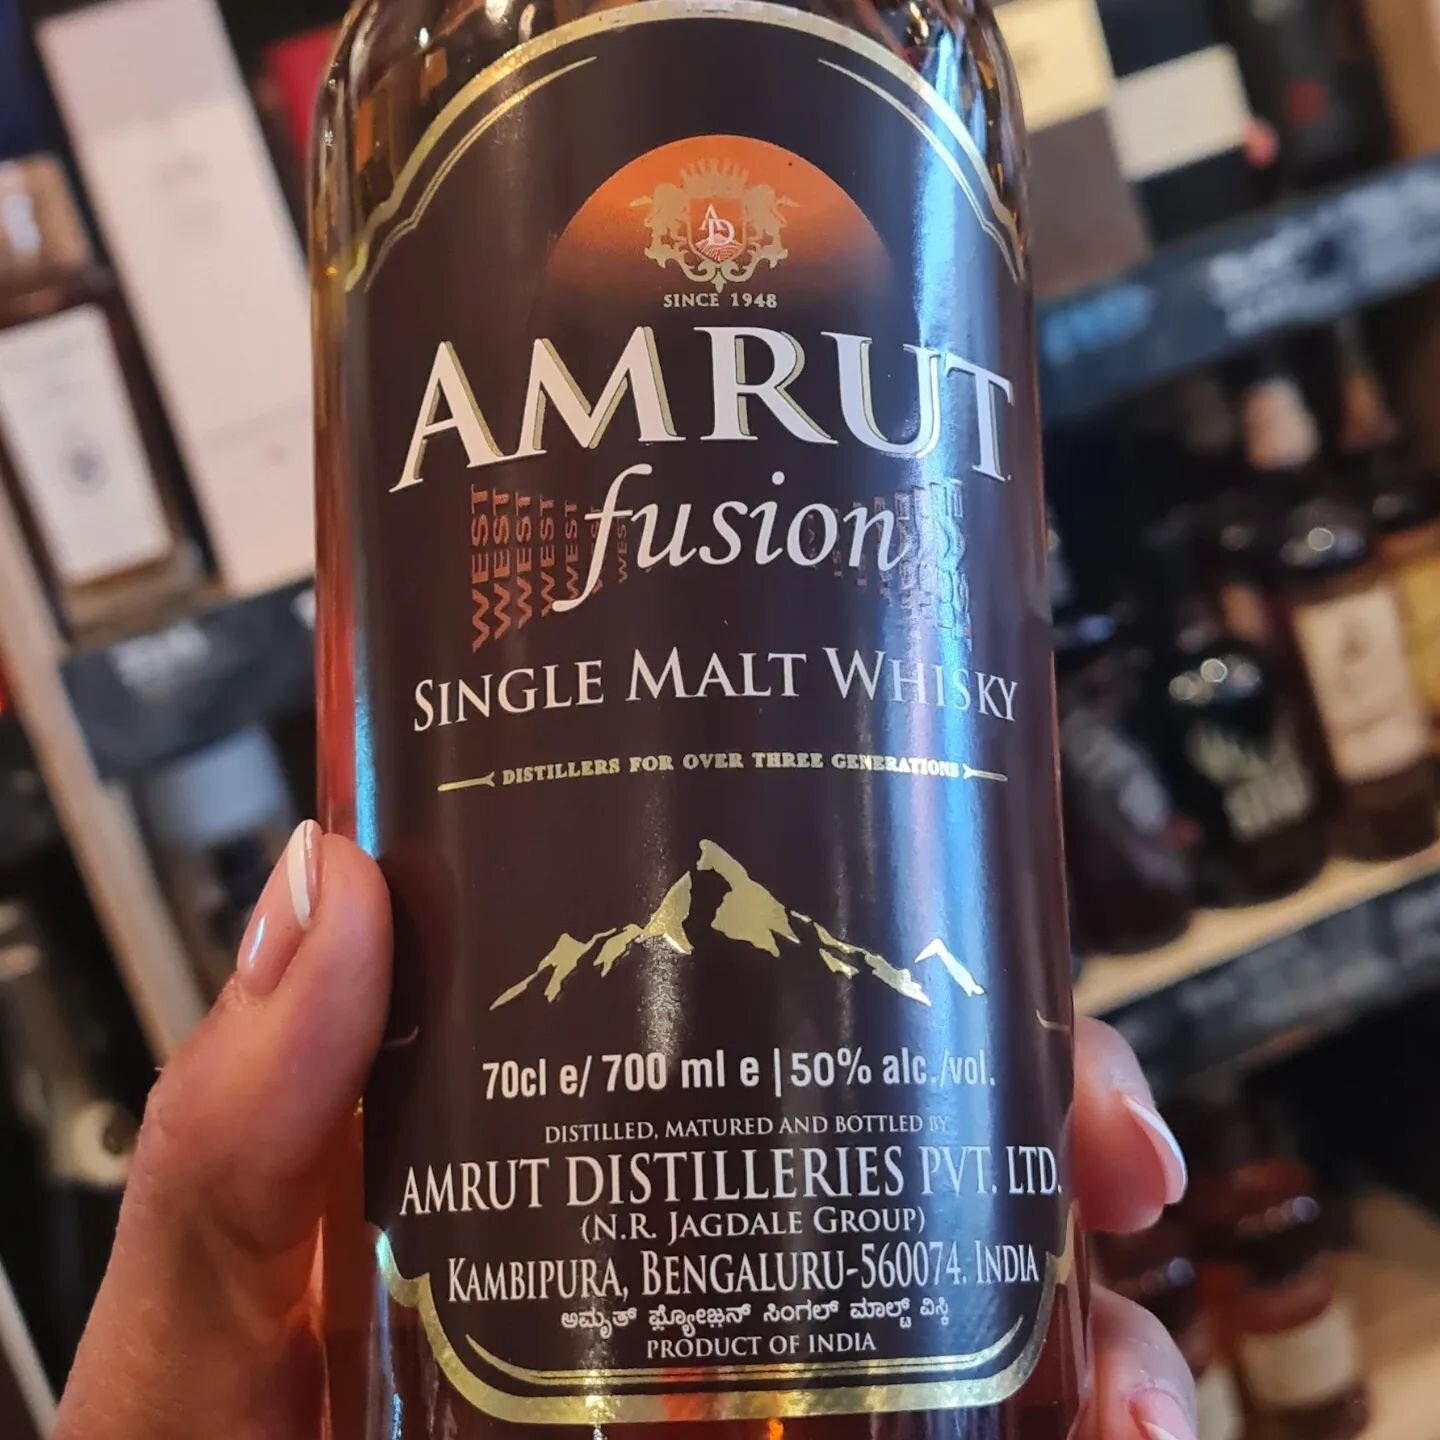 @stmargaretswines 🥃 .......
.
Amrut Indian Fusion Single Malt Whisky - uses two barleys: Indian and Scottish - with the latter being peated for good measure. Fusion has been picking up awards ever since it first appeared in 2009, and in 2012 was nam